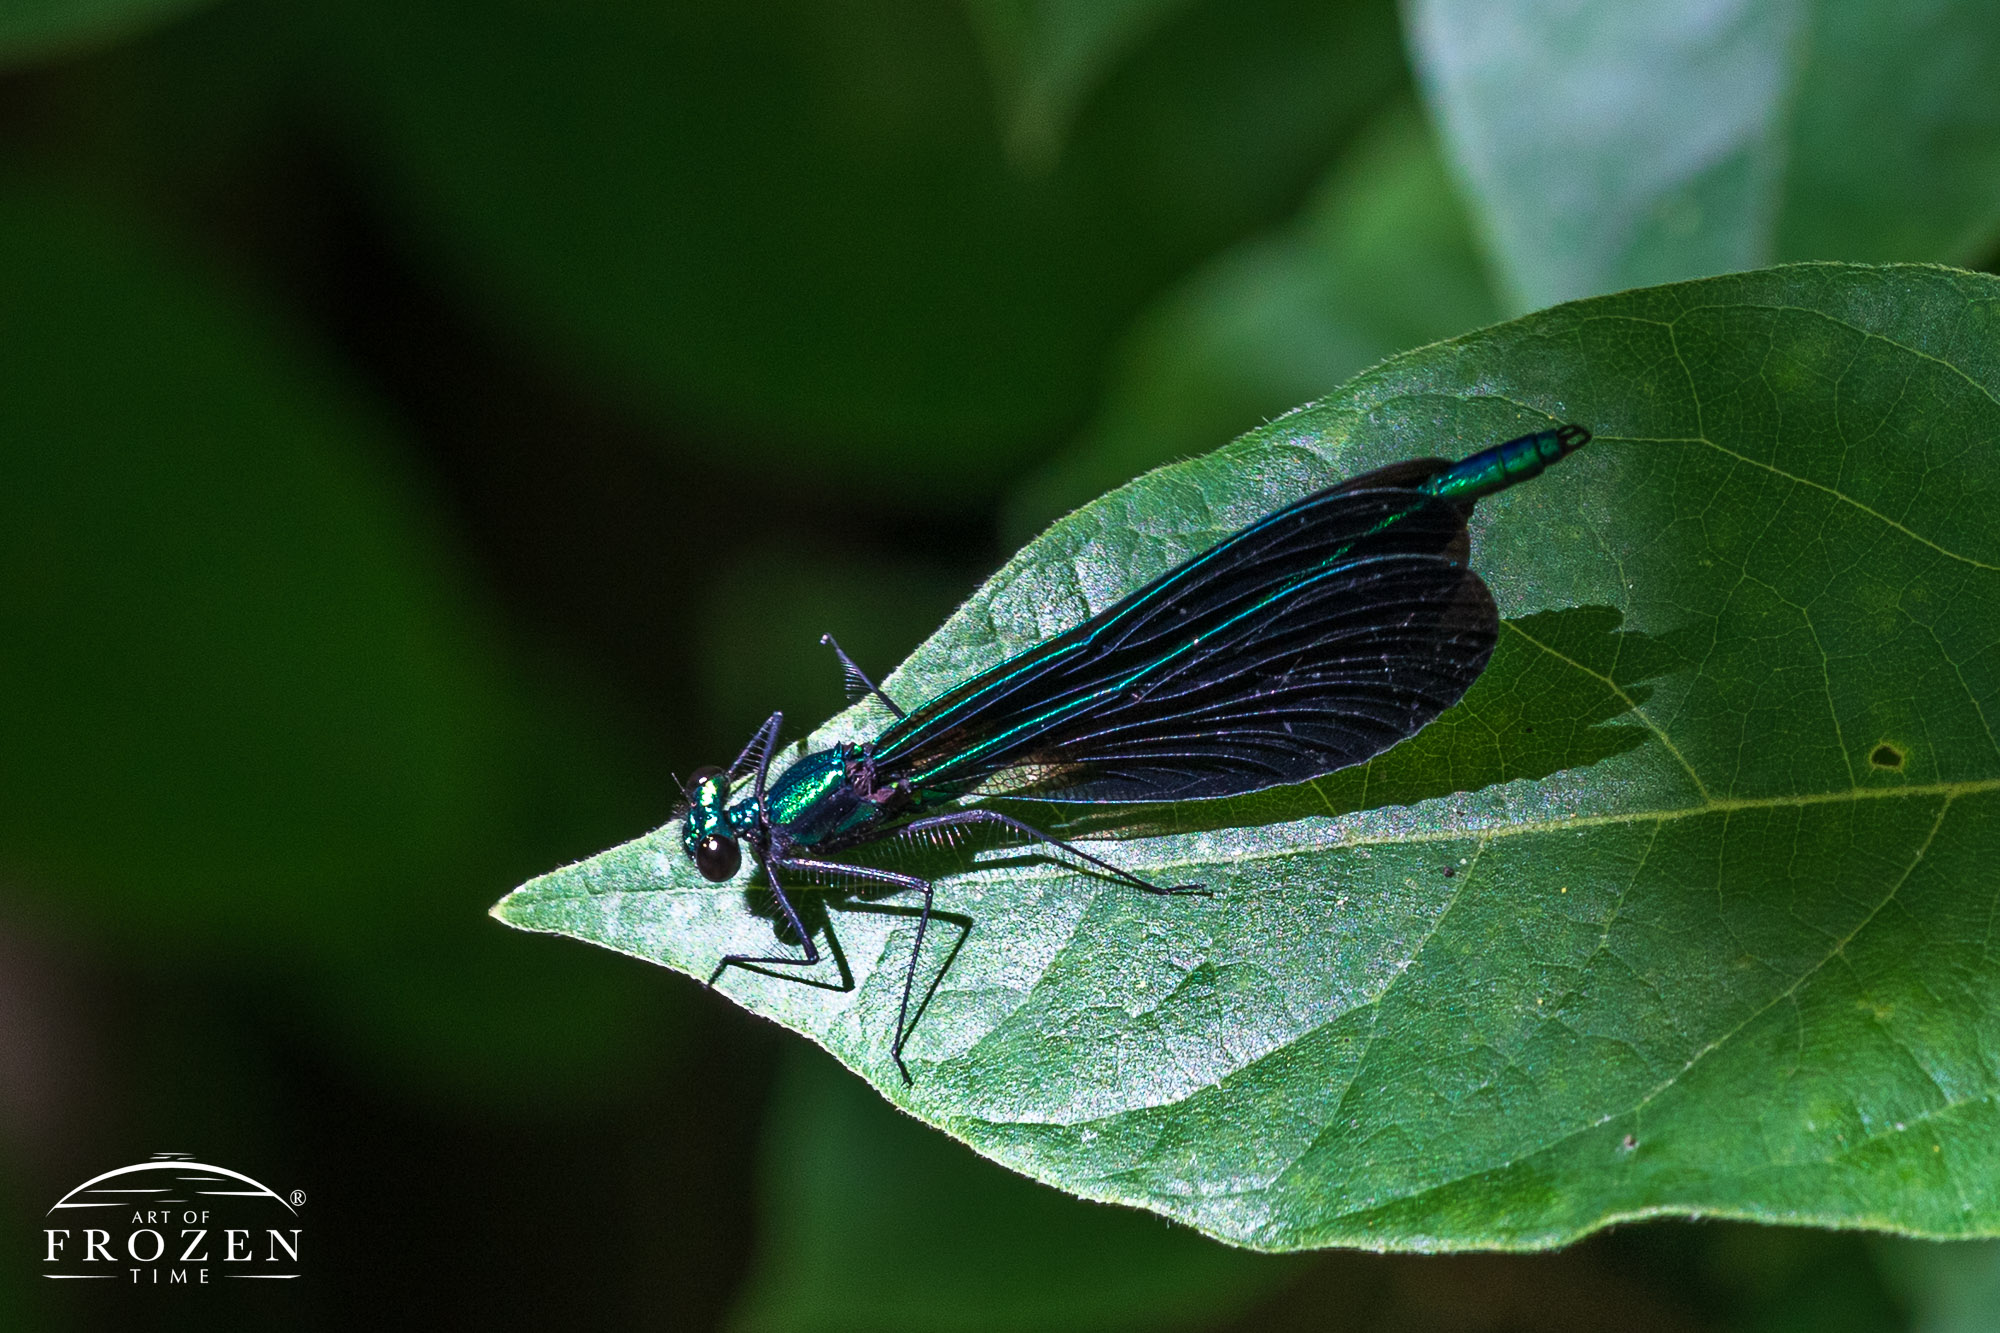 A closeup view of a damselfly basking in a patch of sunlight featuring green iridescent colors and spiny legs